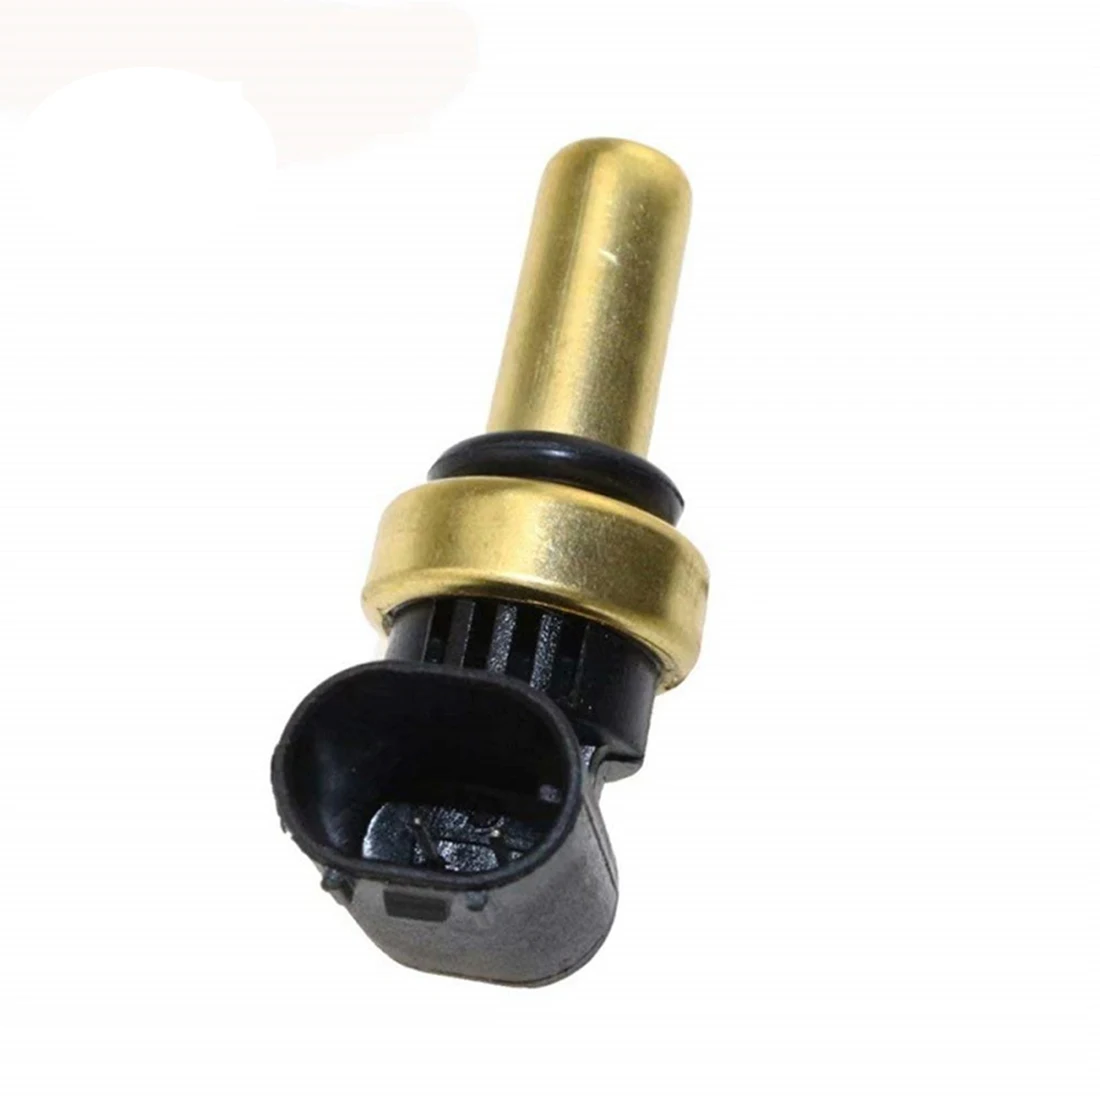 SORGHUM Coolant Temperature Sensor Switch 0005425118 For Mercedes-Benz CL65 CLK500 CL600 C320 C230 68068746AA For Chrysler Dodge